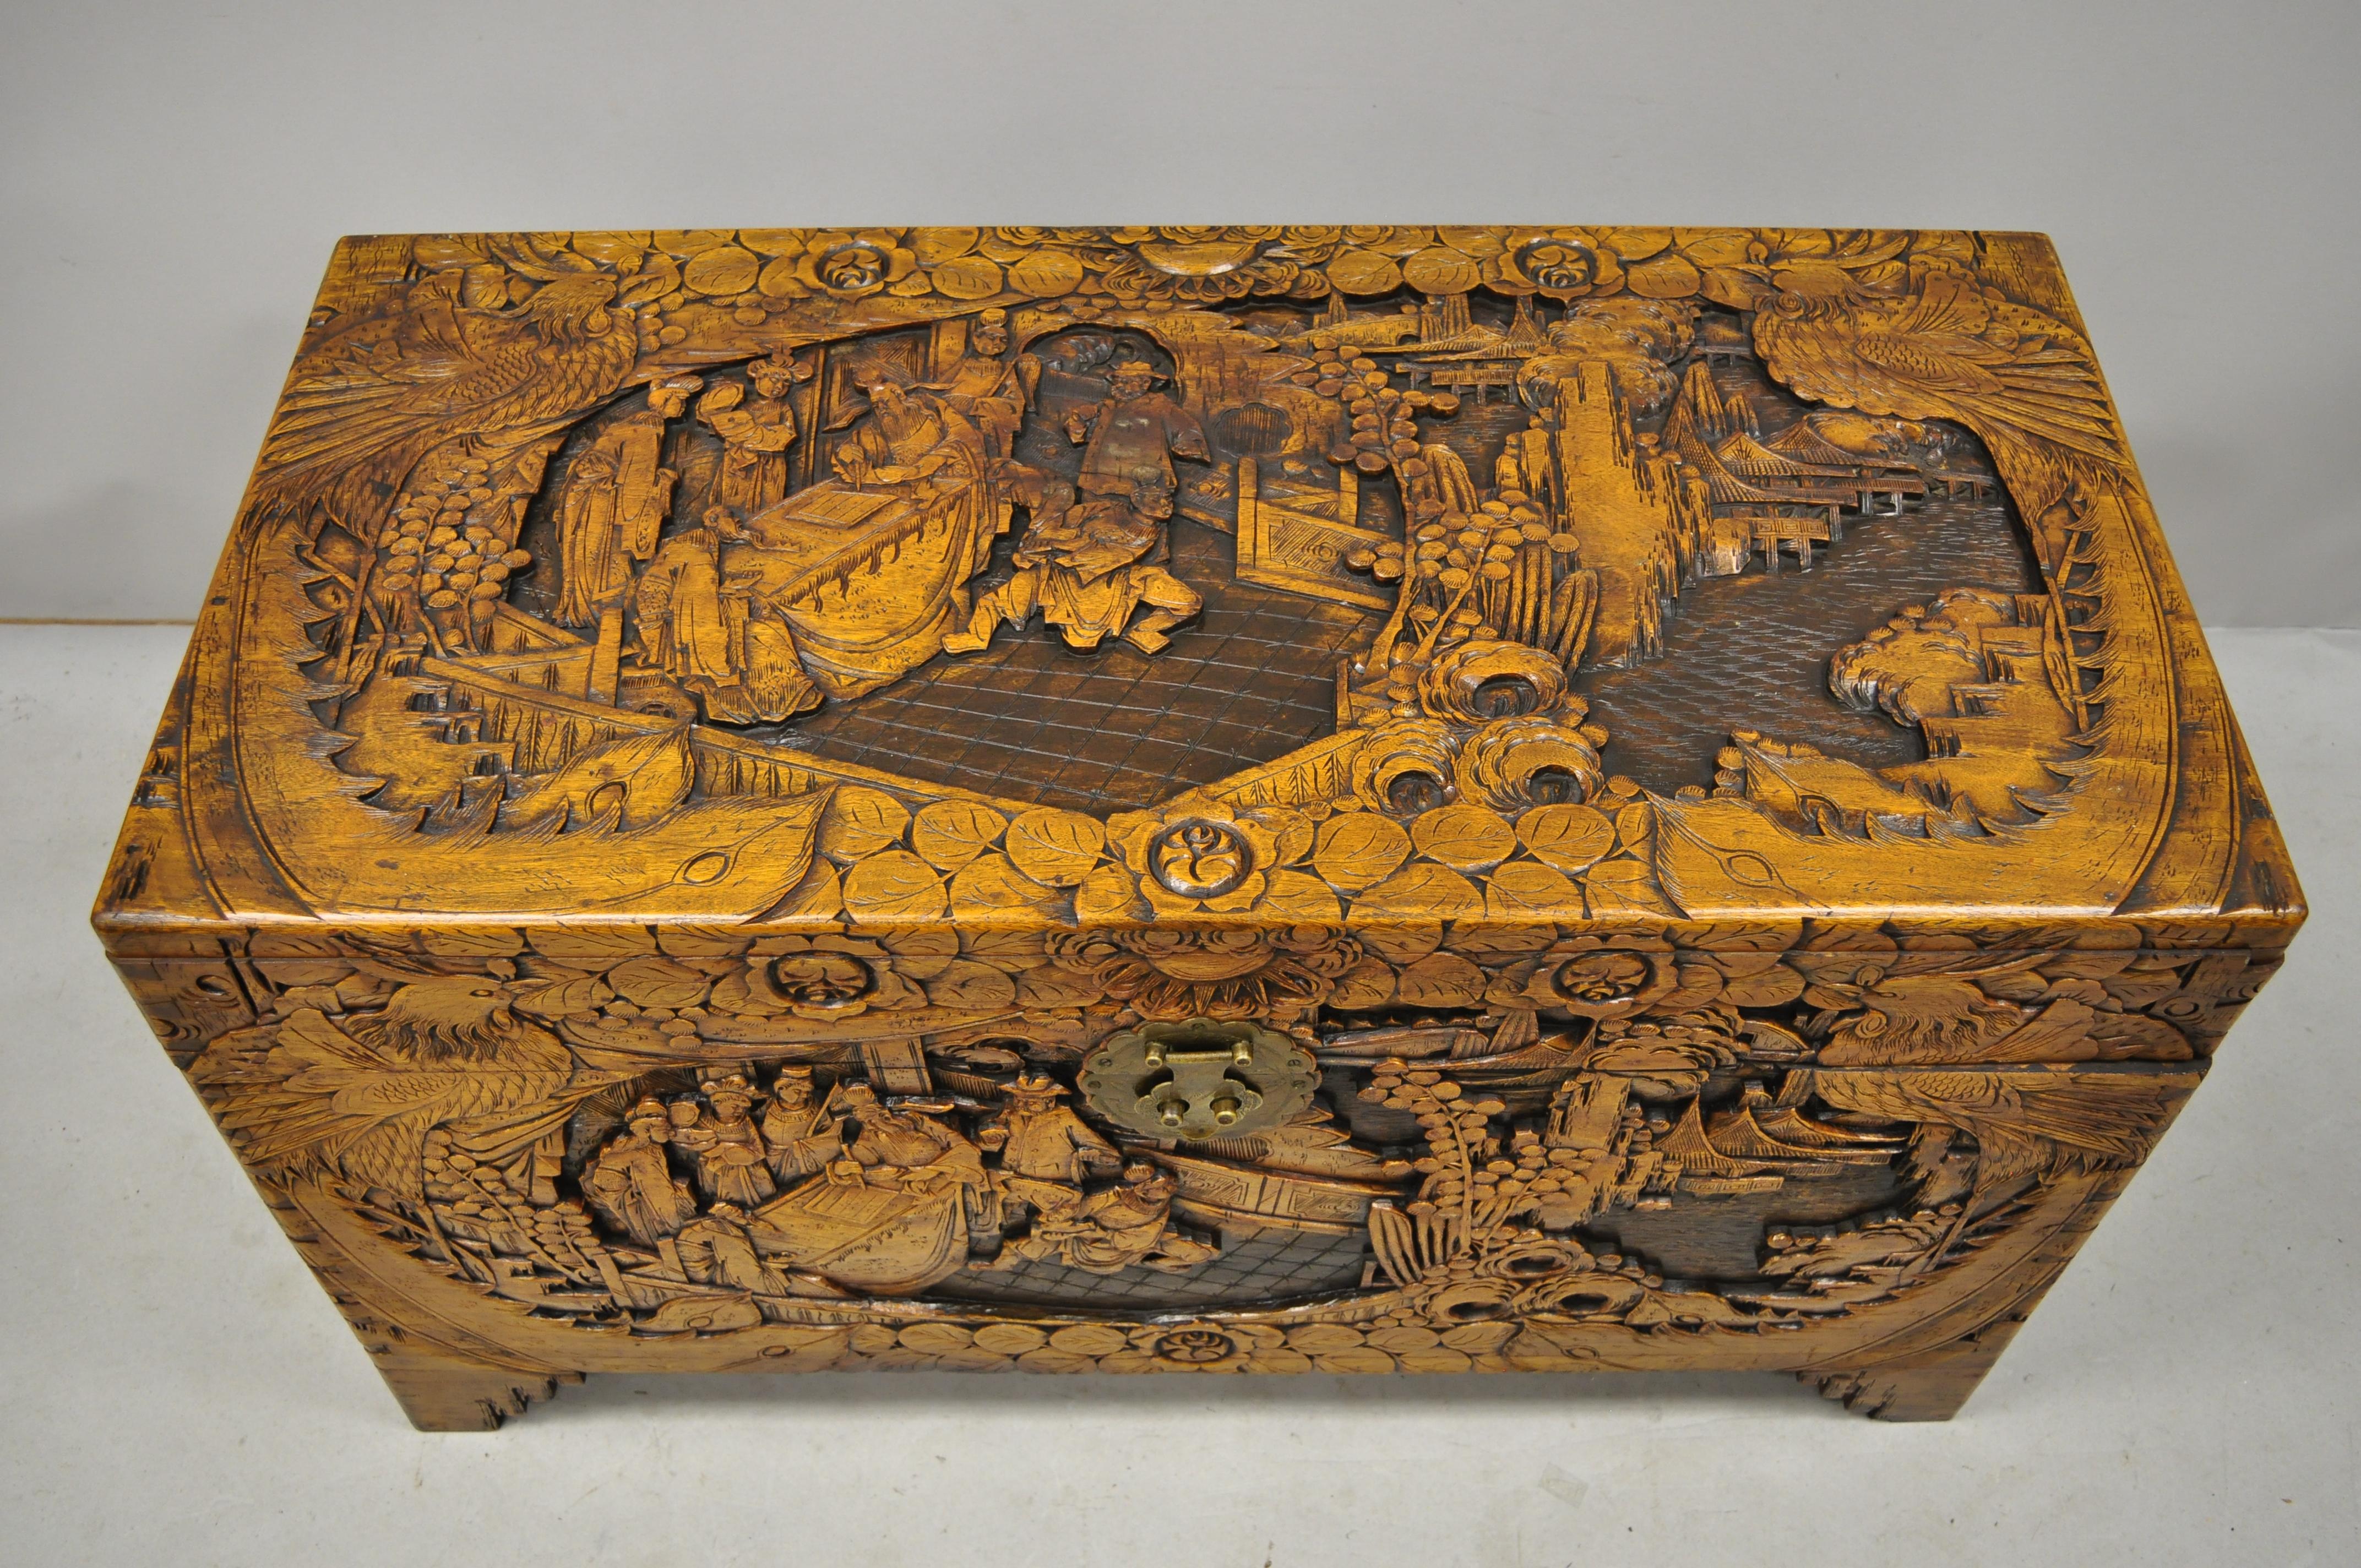 Antique Chinese carved camphor wood figural trunk blanket hope chest. Item features remarkable relief carved scenes with birds, wisemen, and palace scenes, solid wood construction, very nice vintage item, quality craftsmanship, circa mid-20th